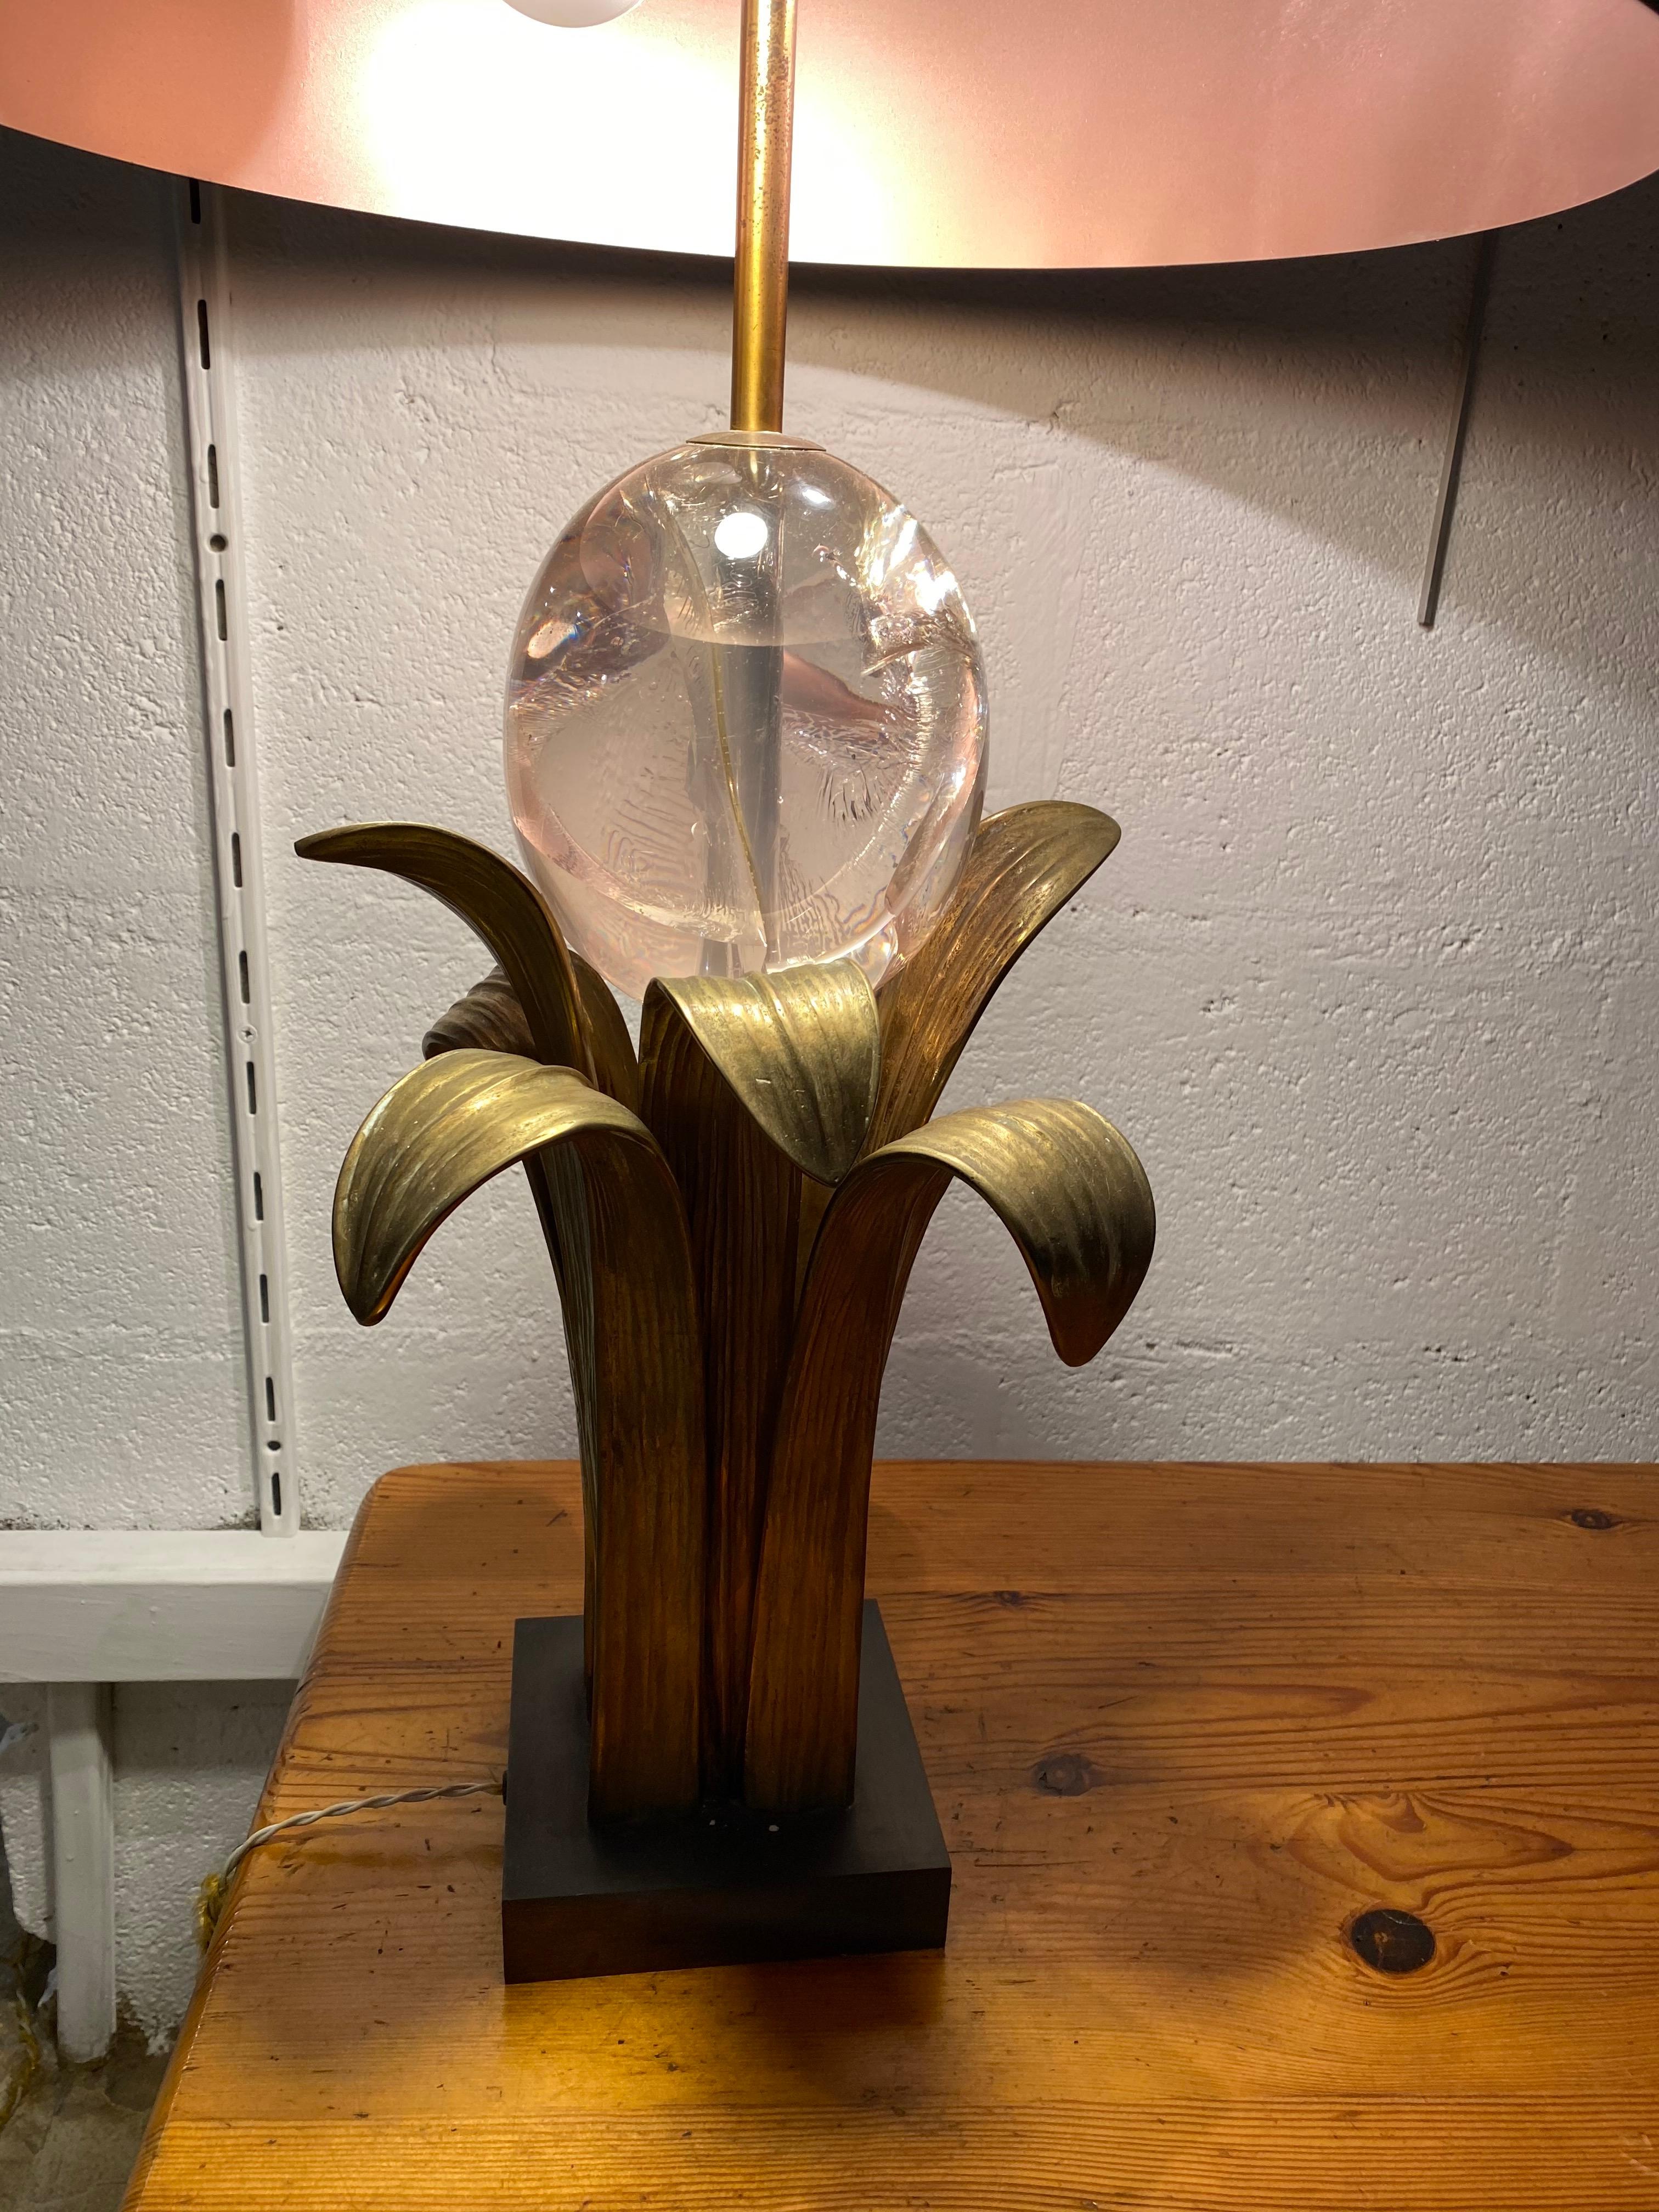 Sculpture table lamp
Maison Charles,
circa 1975
Resin and brass
Original lamp shade
Measures: H 74 x D 40 cm.